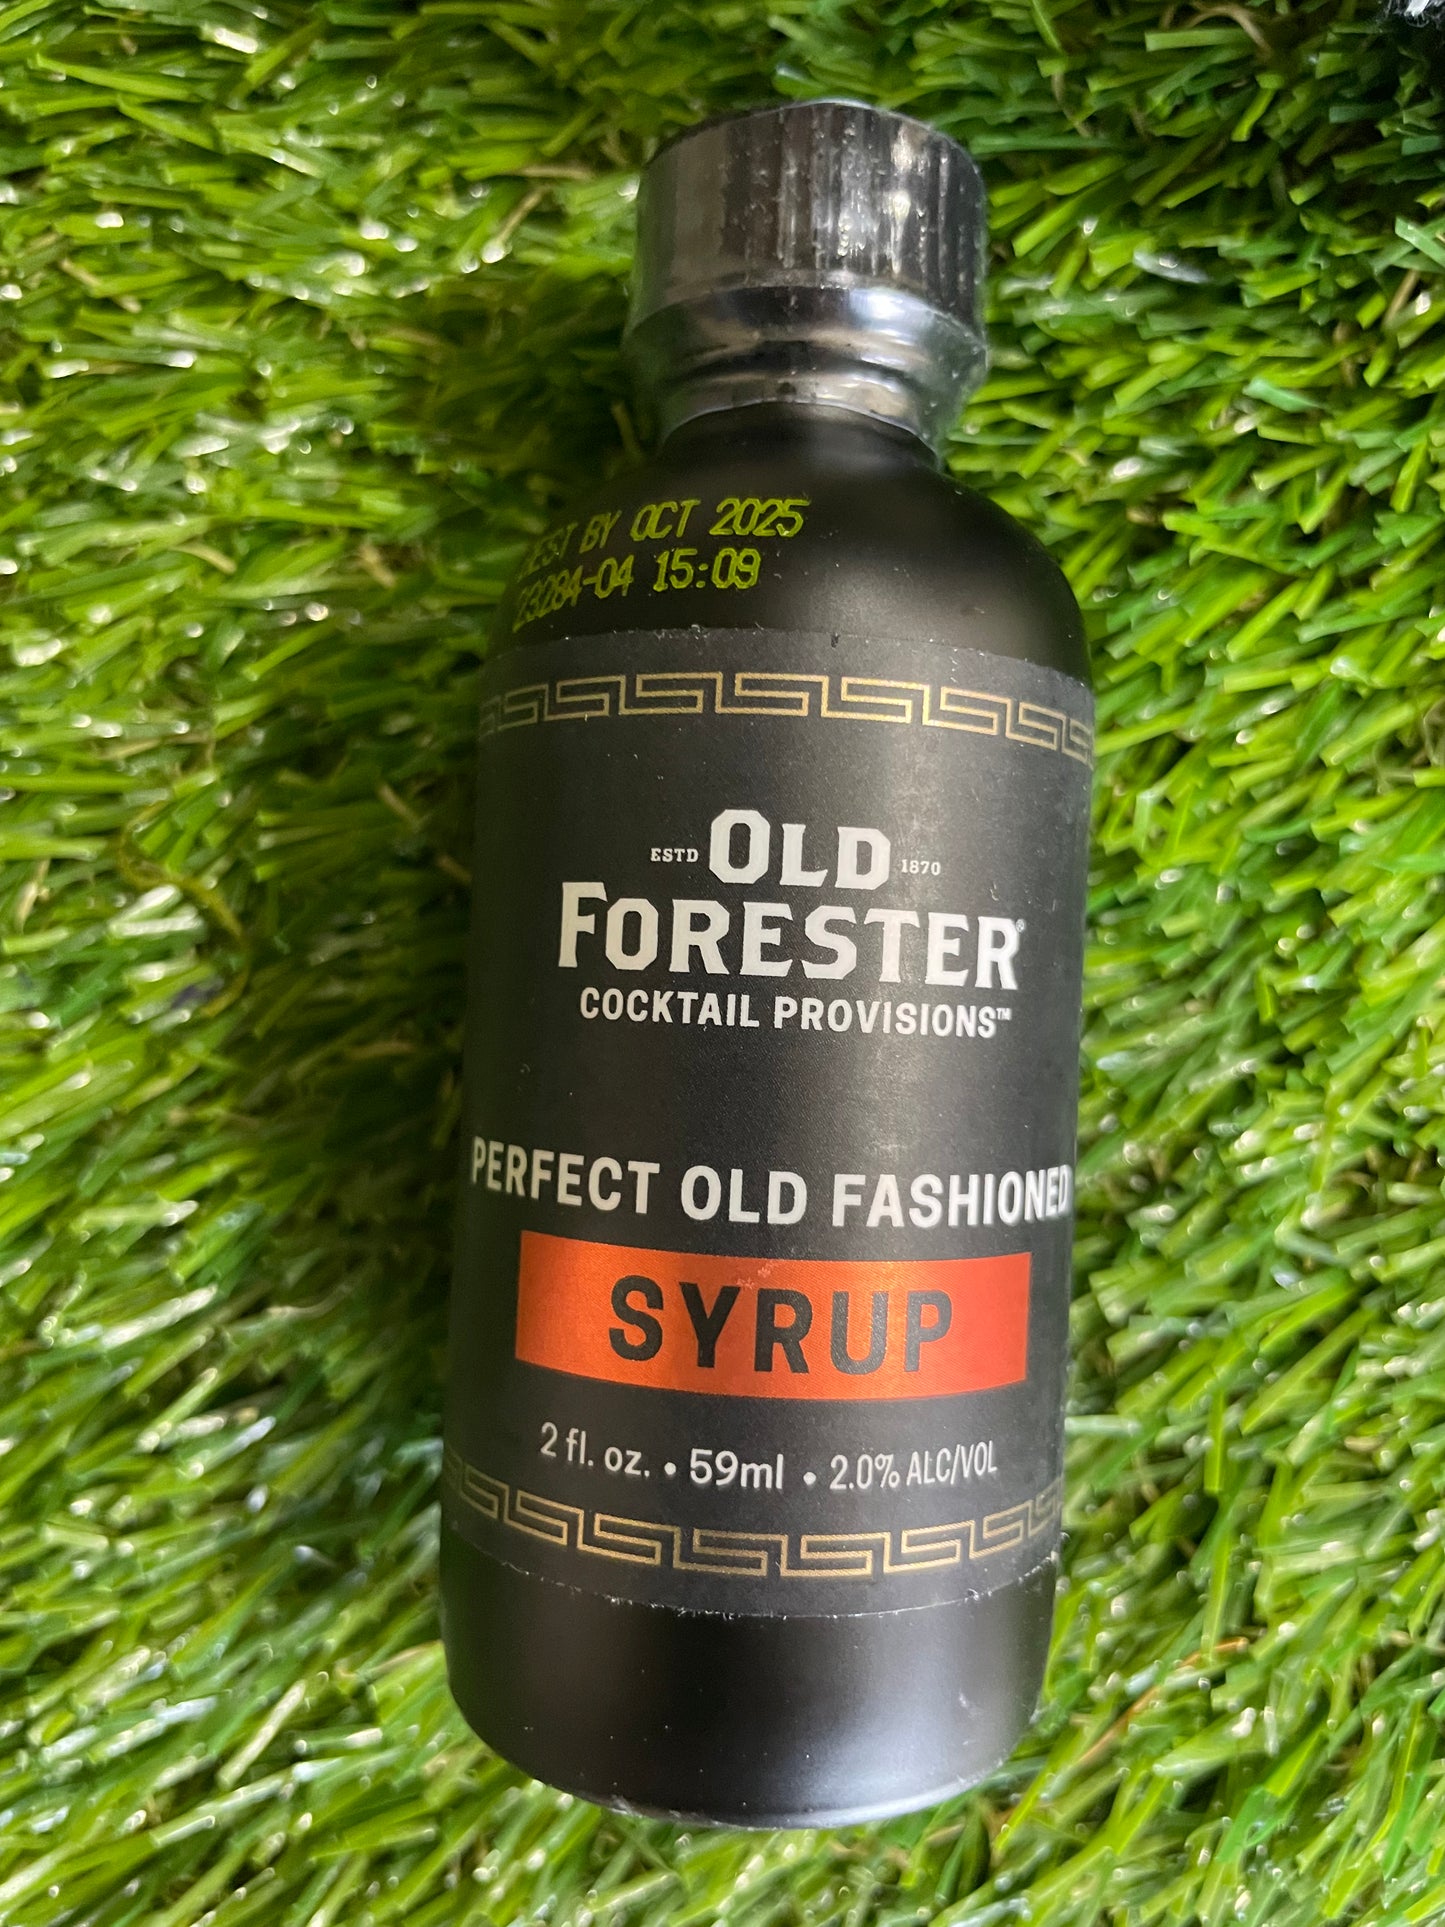 Old Forester- Old Fashioned Syrup